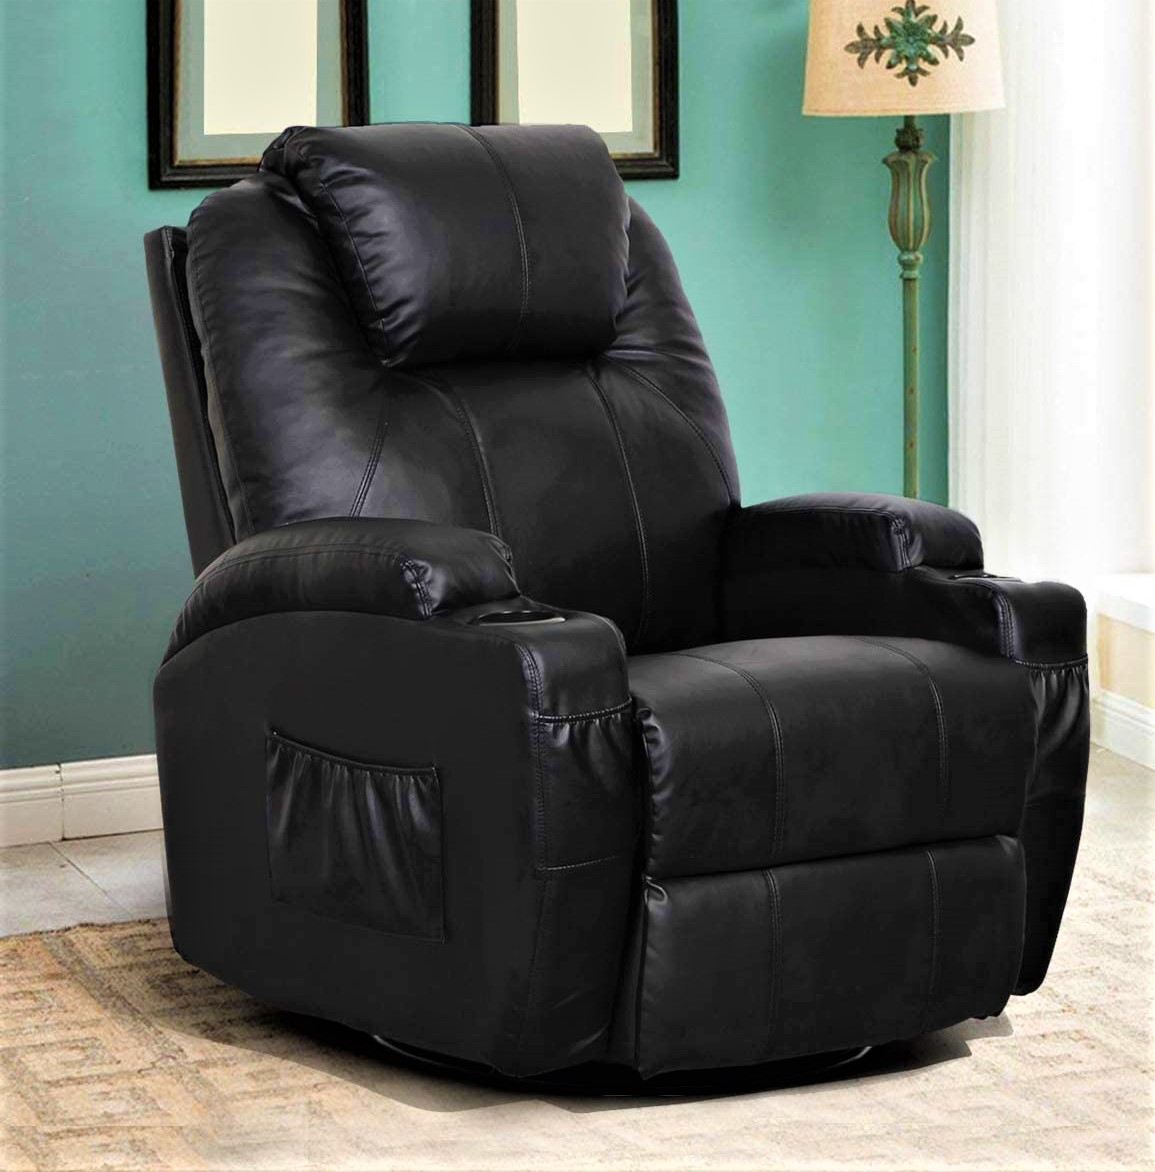 Esright Electric Recliner Massage Chair